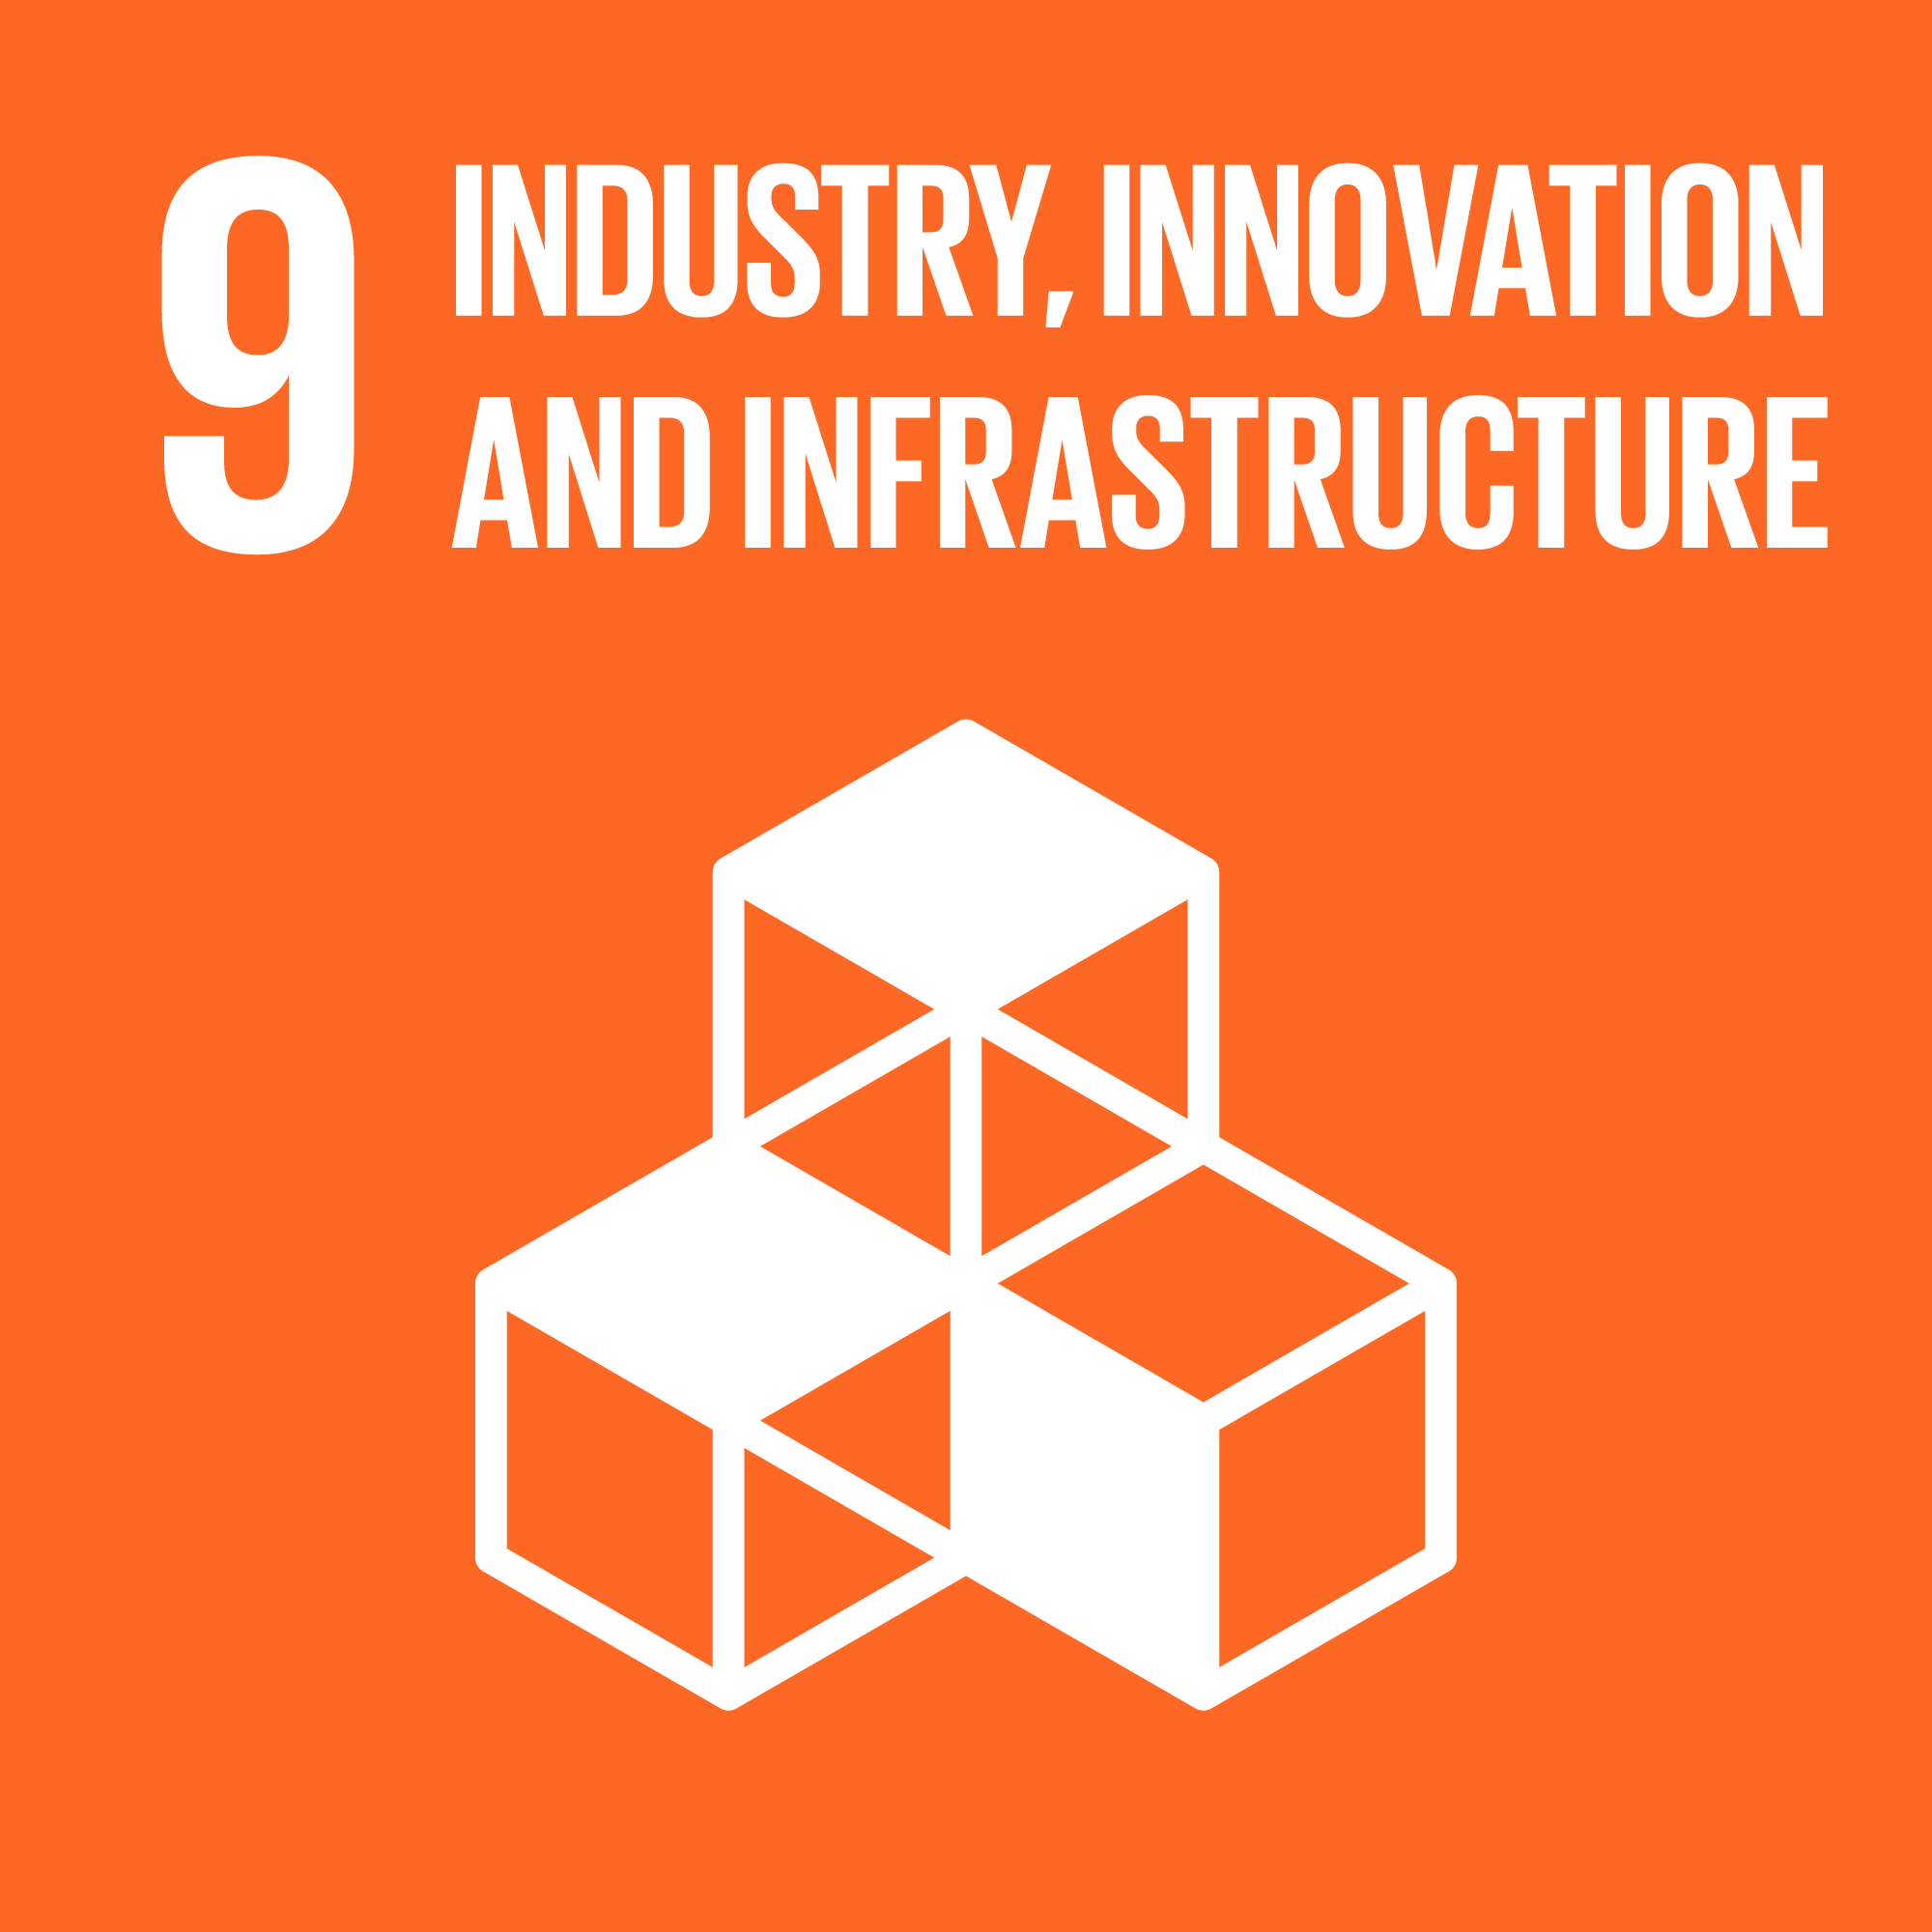 Agenda 2030 goal number 9: Industry, innovation, and infrastructure